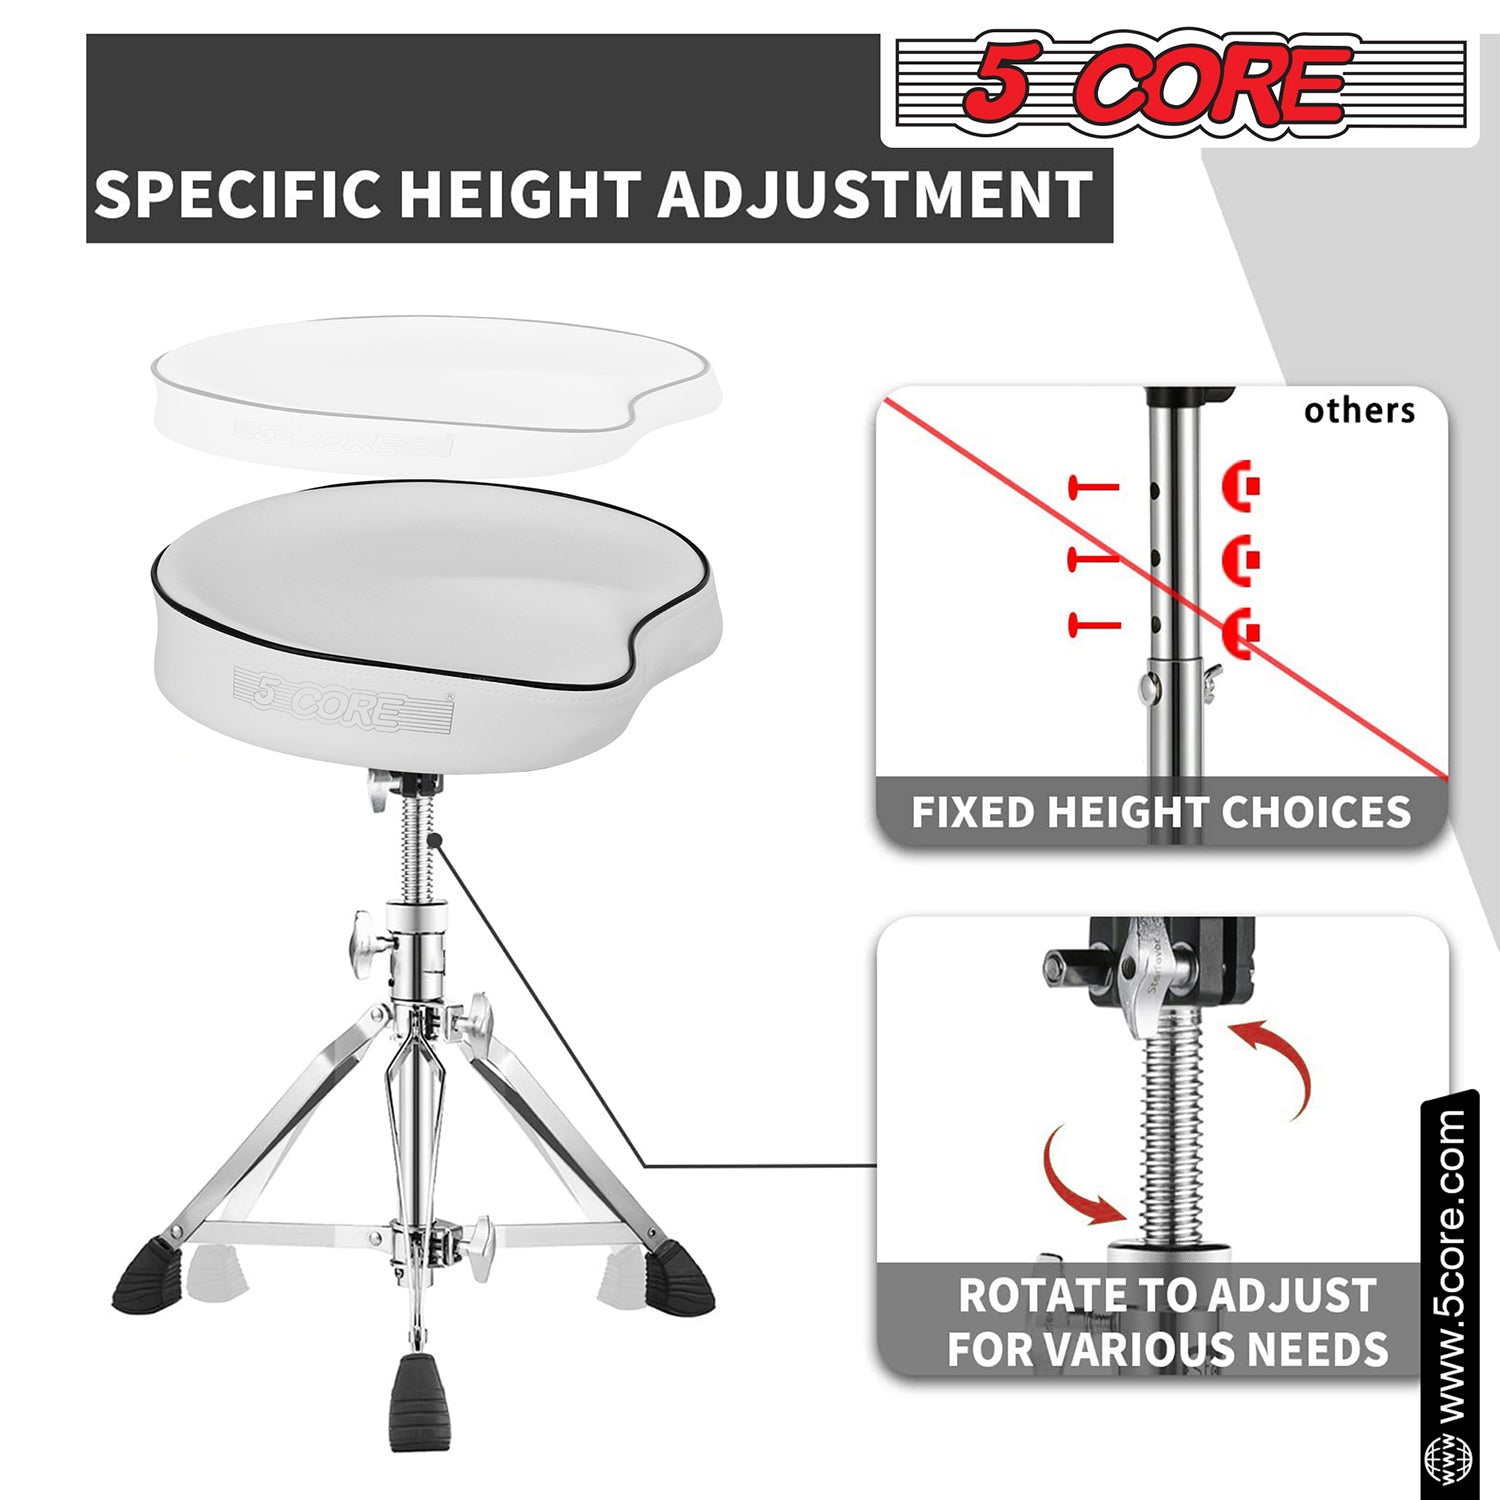 5 Core Performance Stool: Heavy-duty chair with plush padding and height adjustment for musicians.